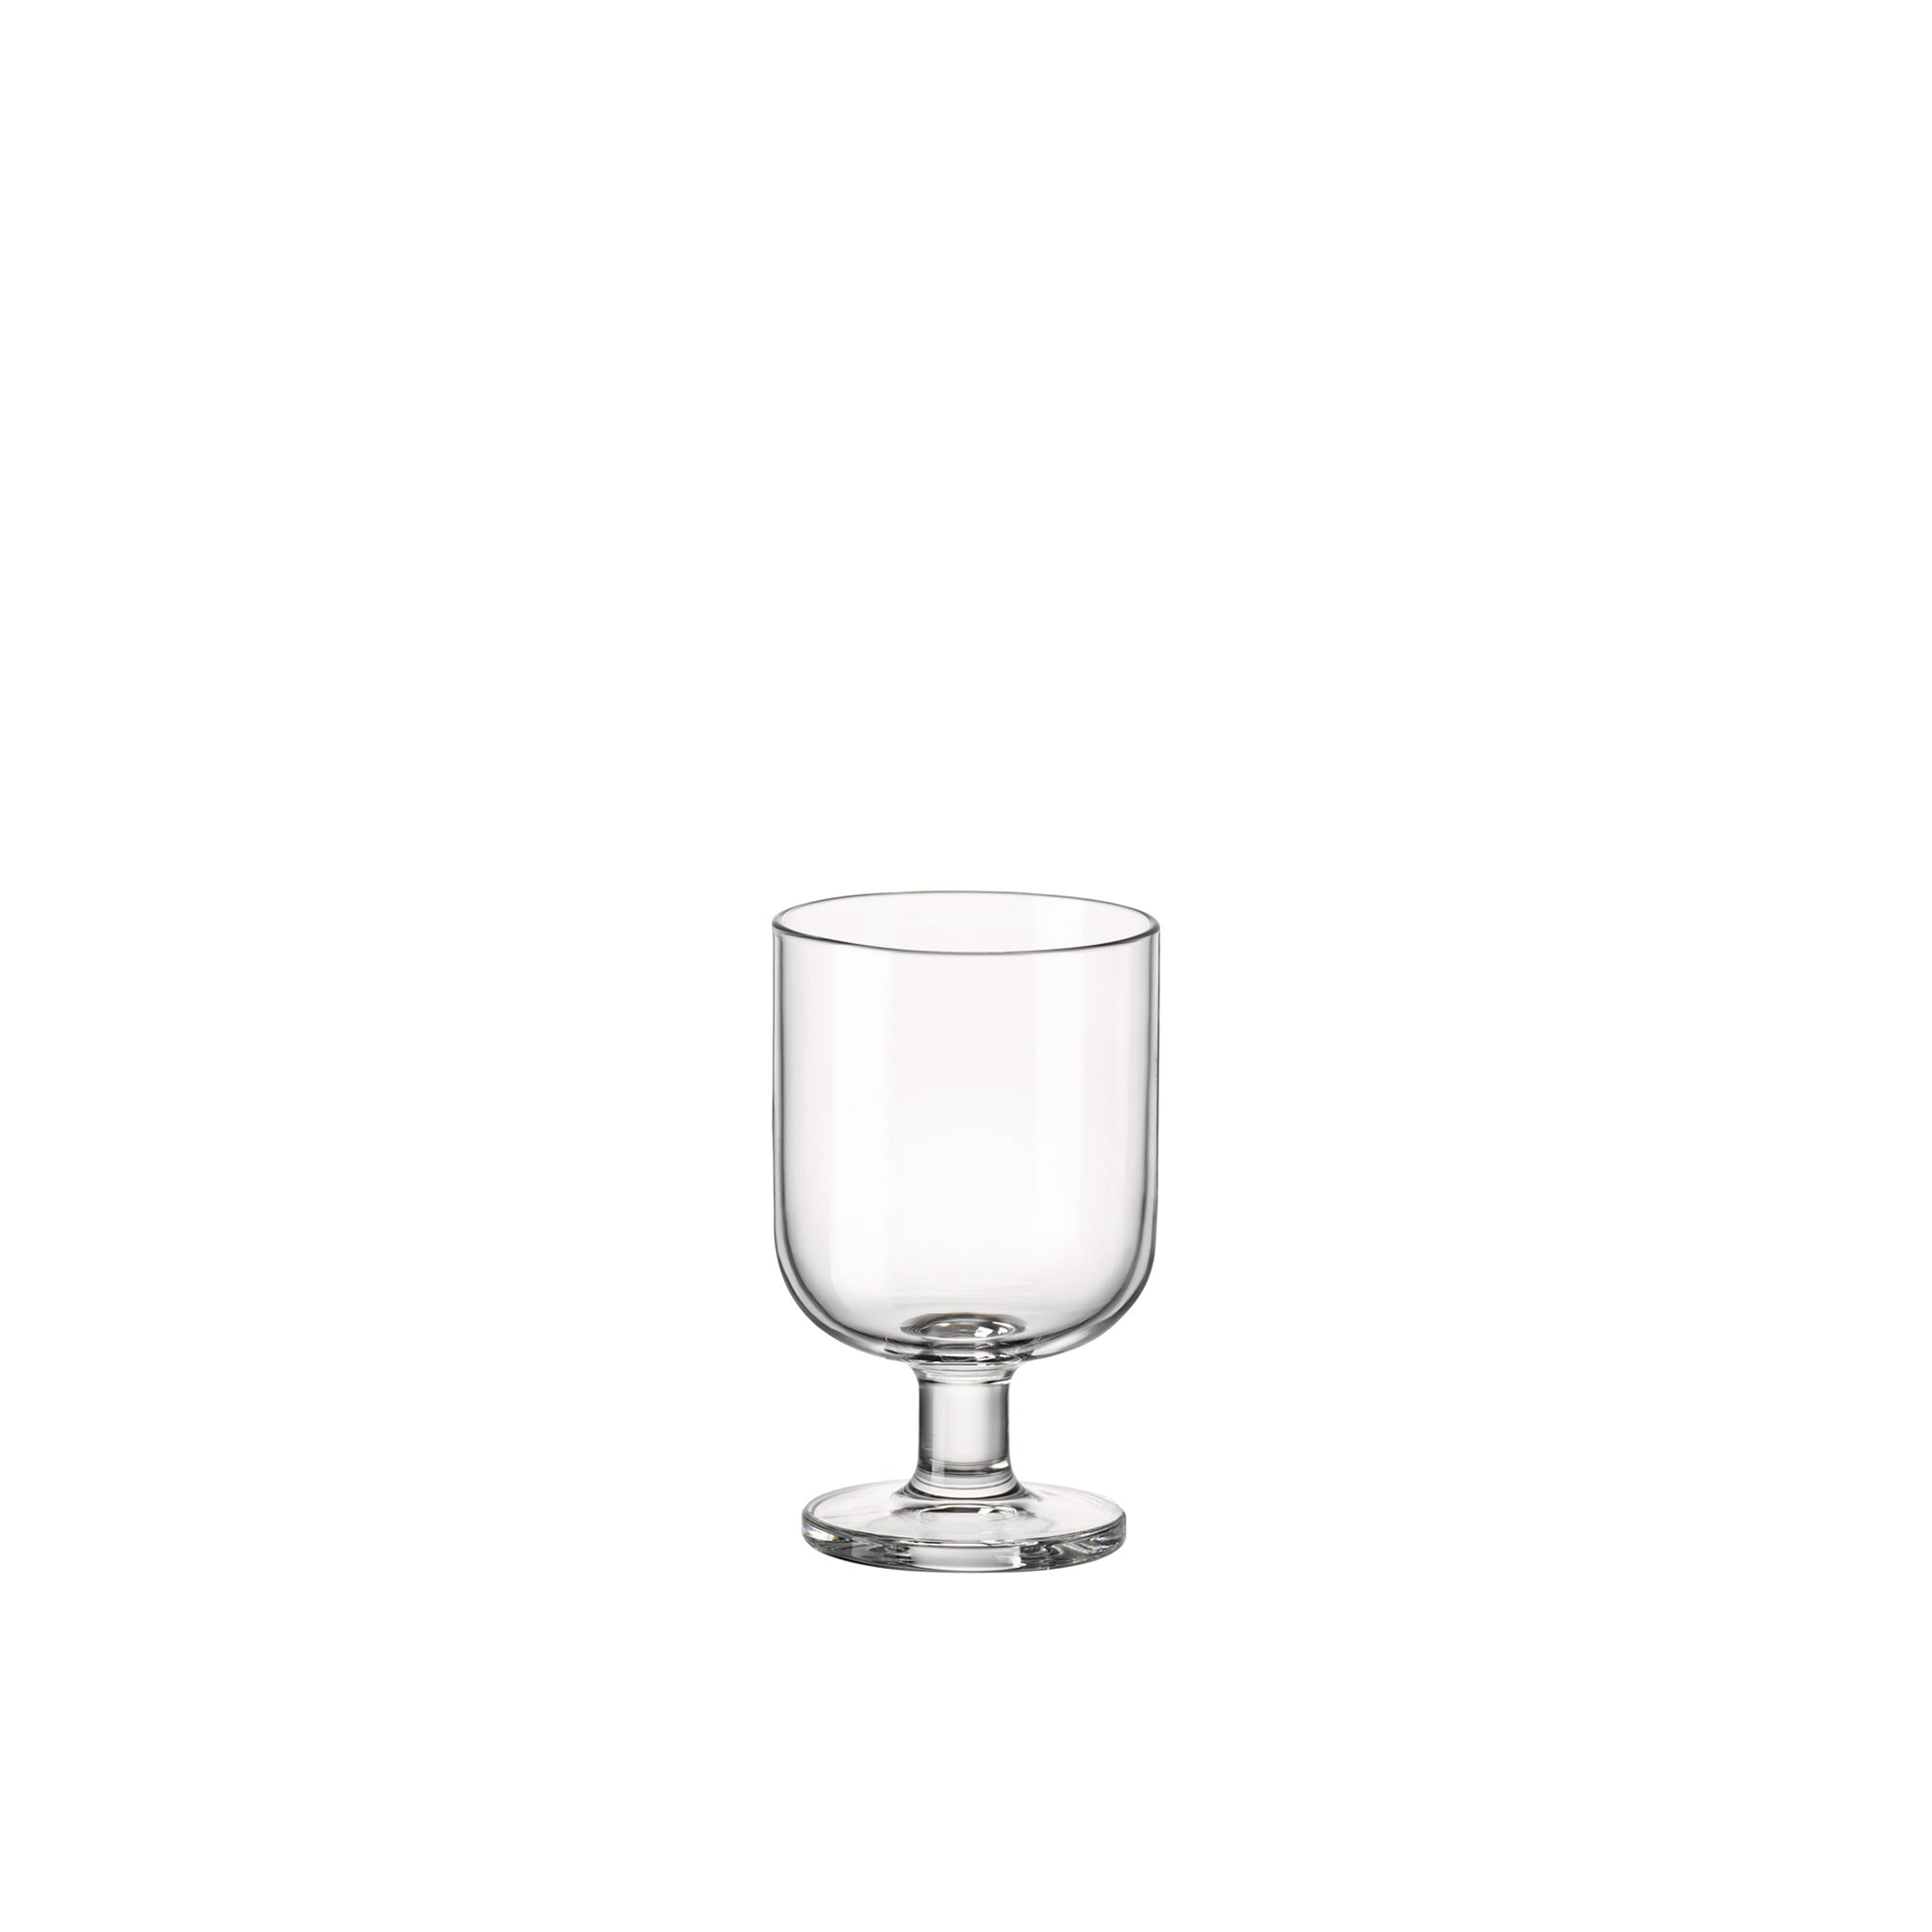 Hosteria 5.5 oz. Small Stackable Wine Glasses (Set of 6)